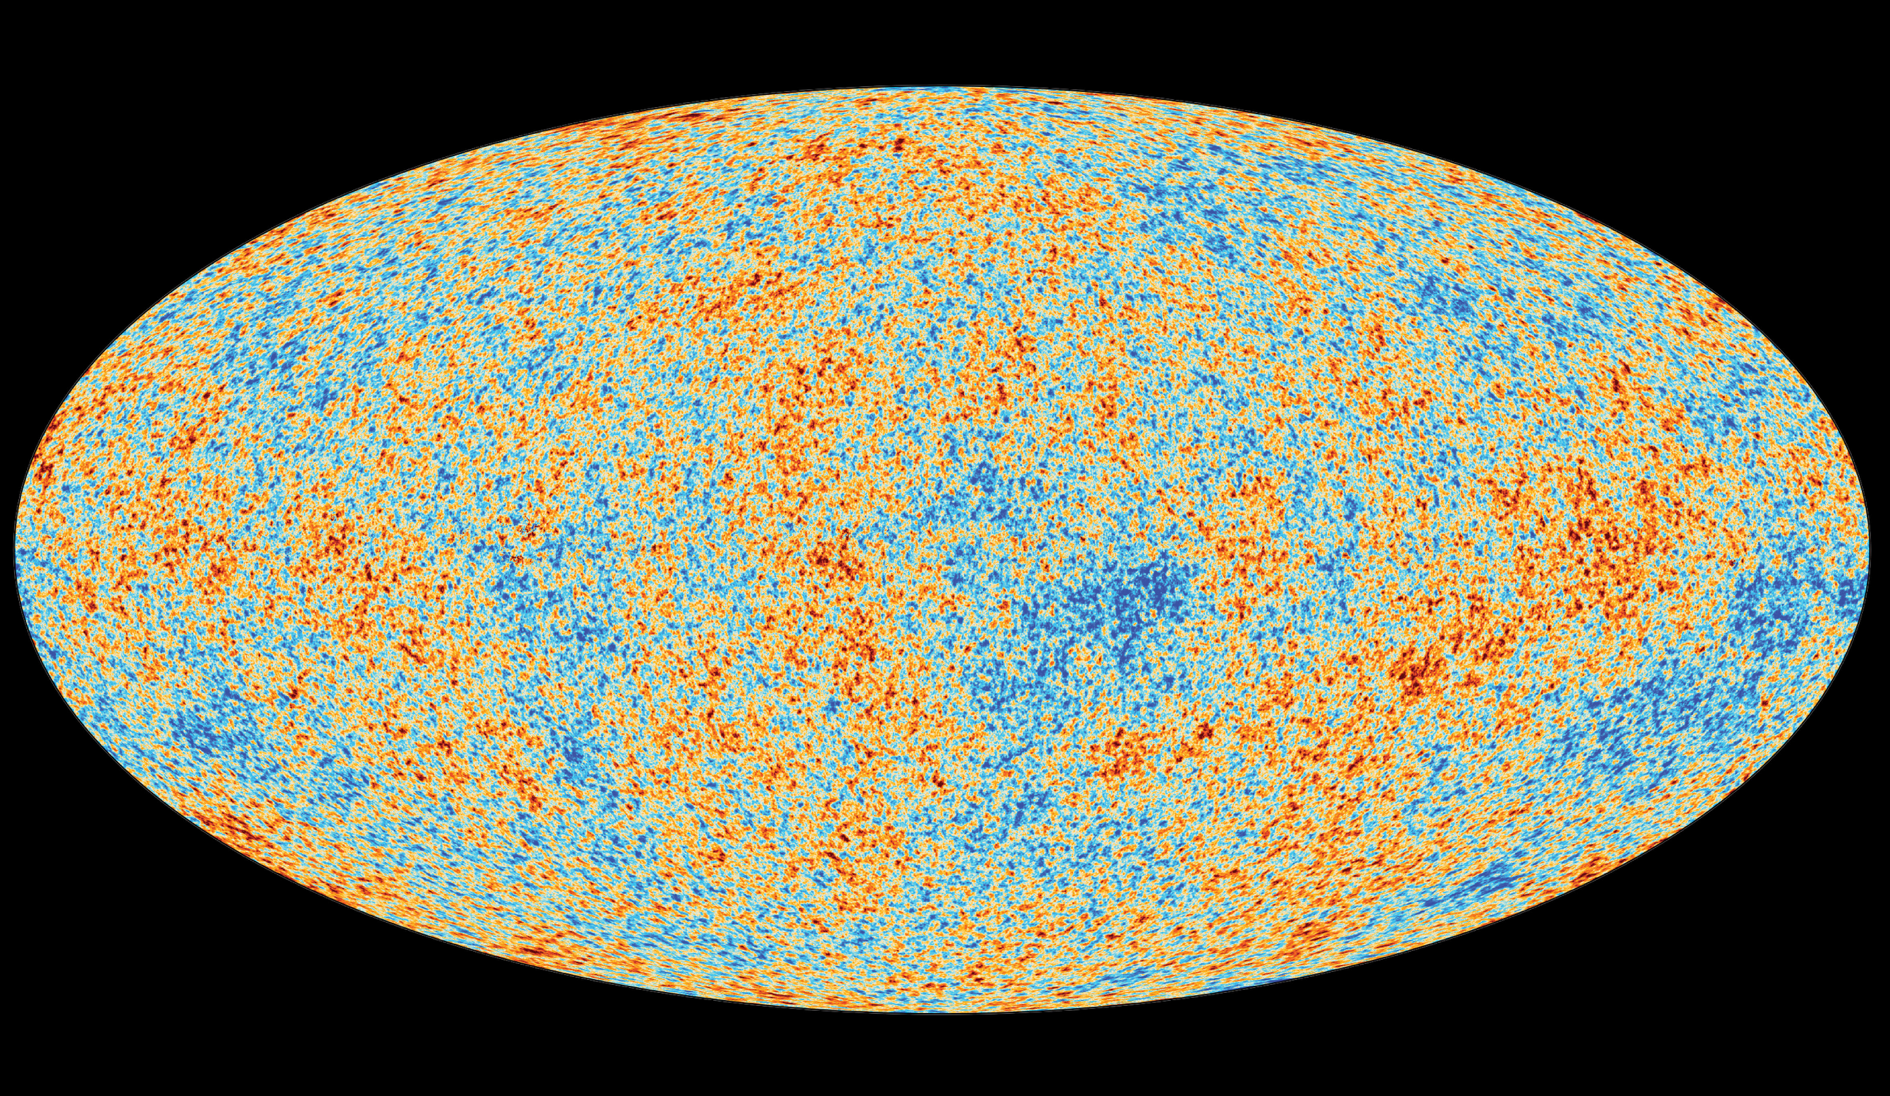 Large oval fills most of the scene. The edges are black. The oval is mottled with blue and orange spots.